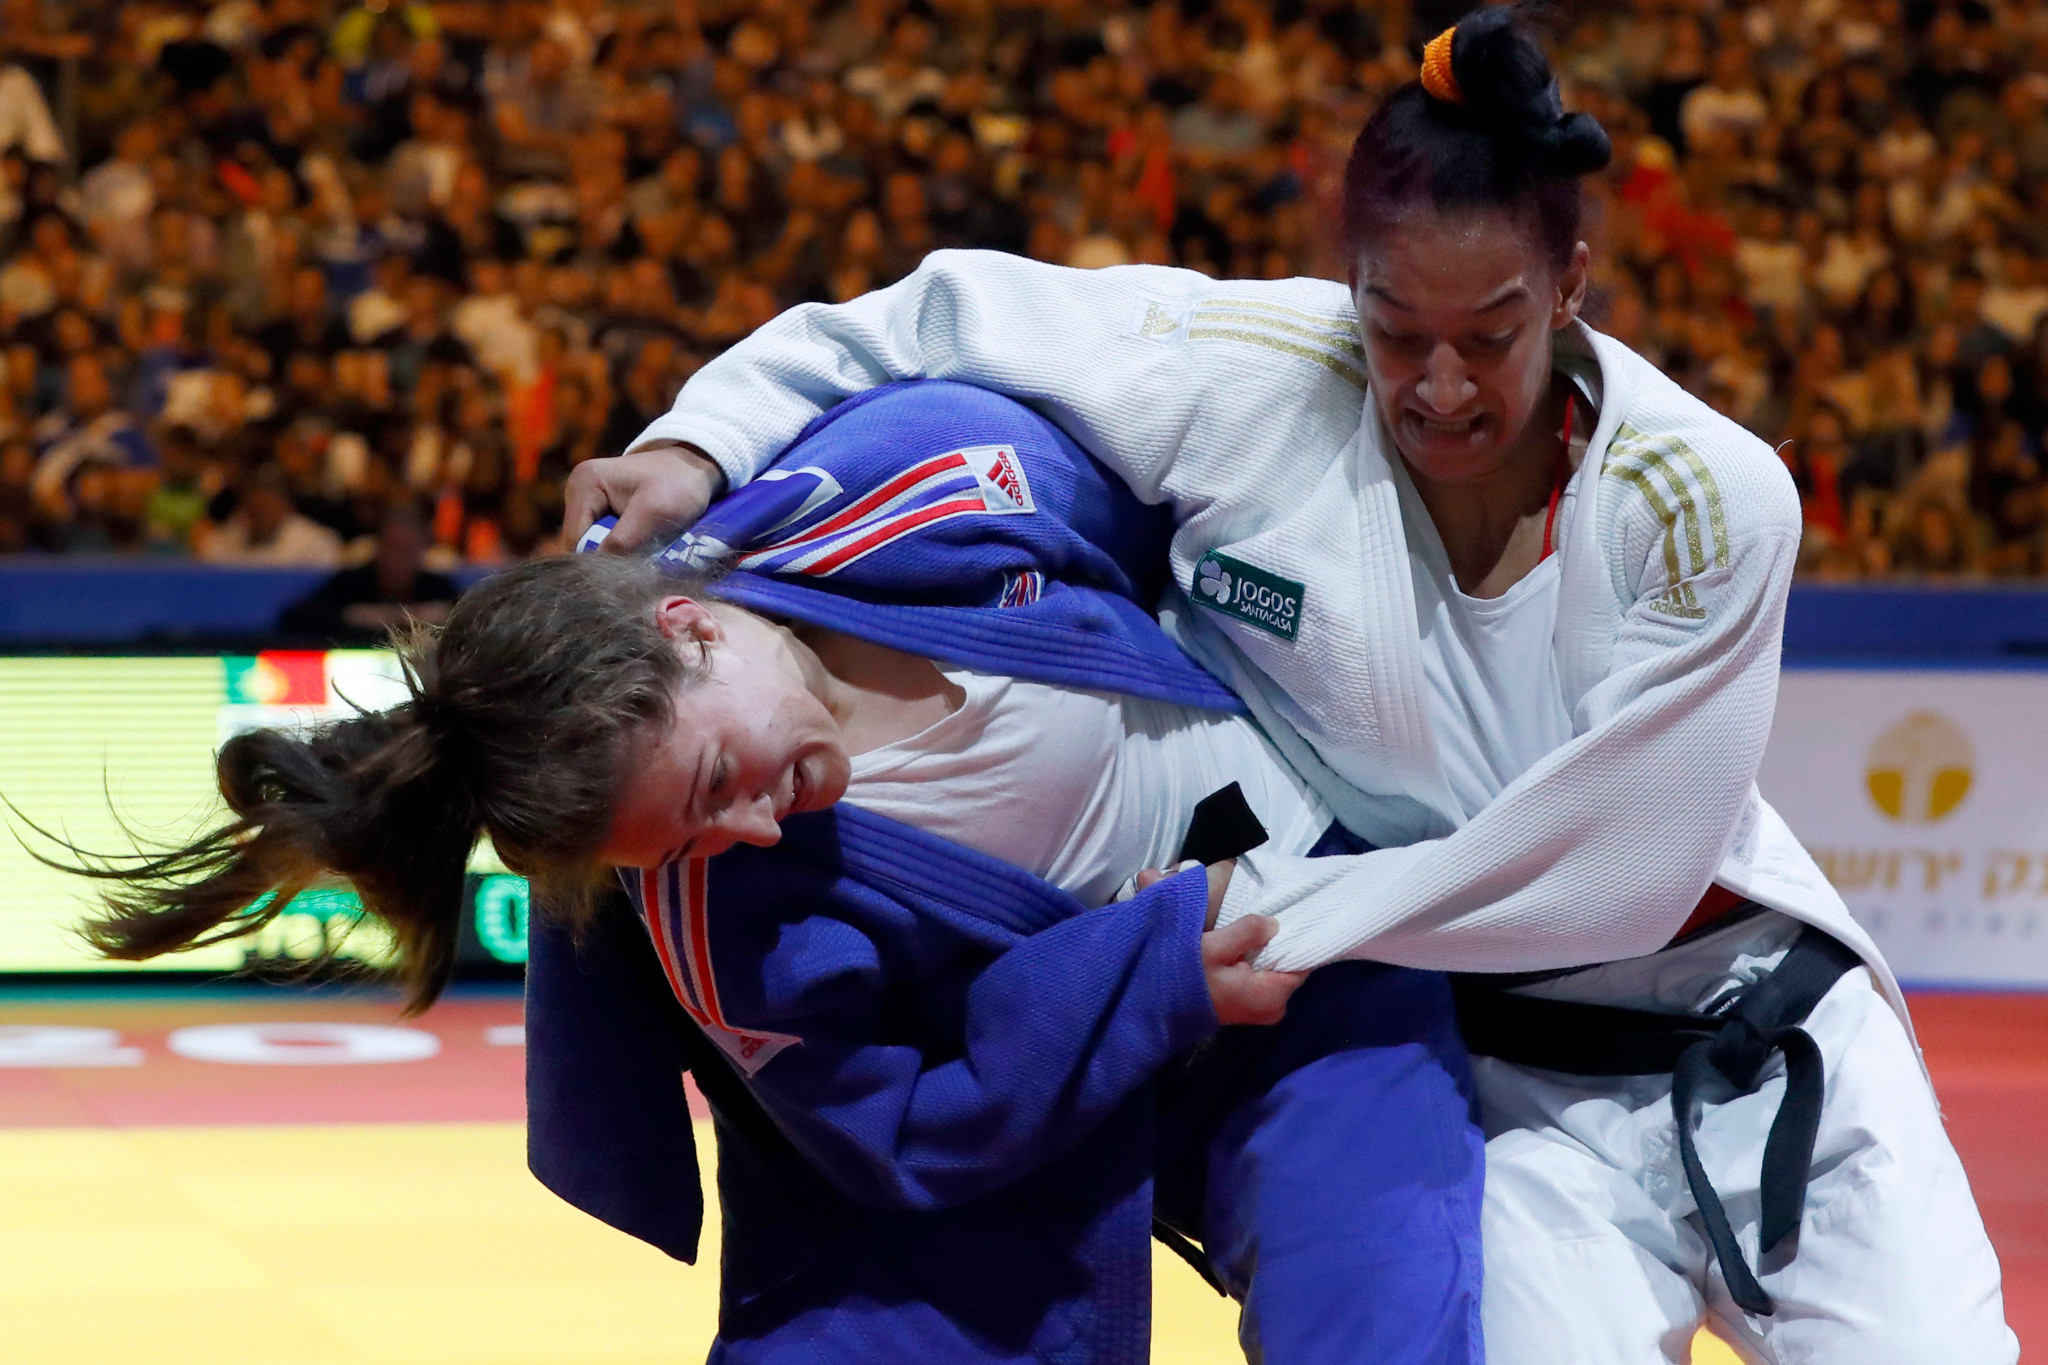 Many British judokas are gaining prominence on the international stage, including world bronze medallist Natalie Powell ©Getty Images